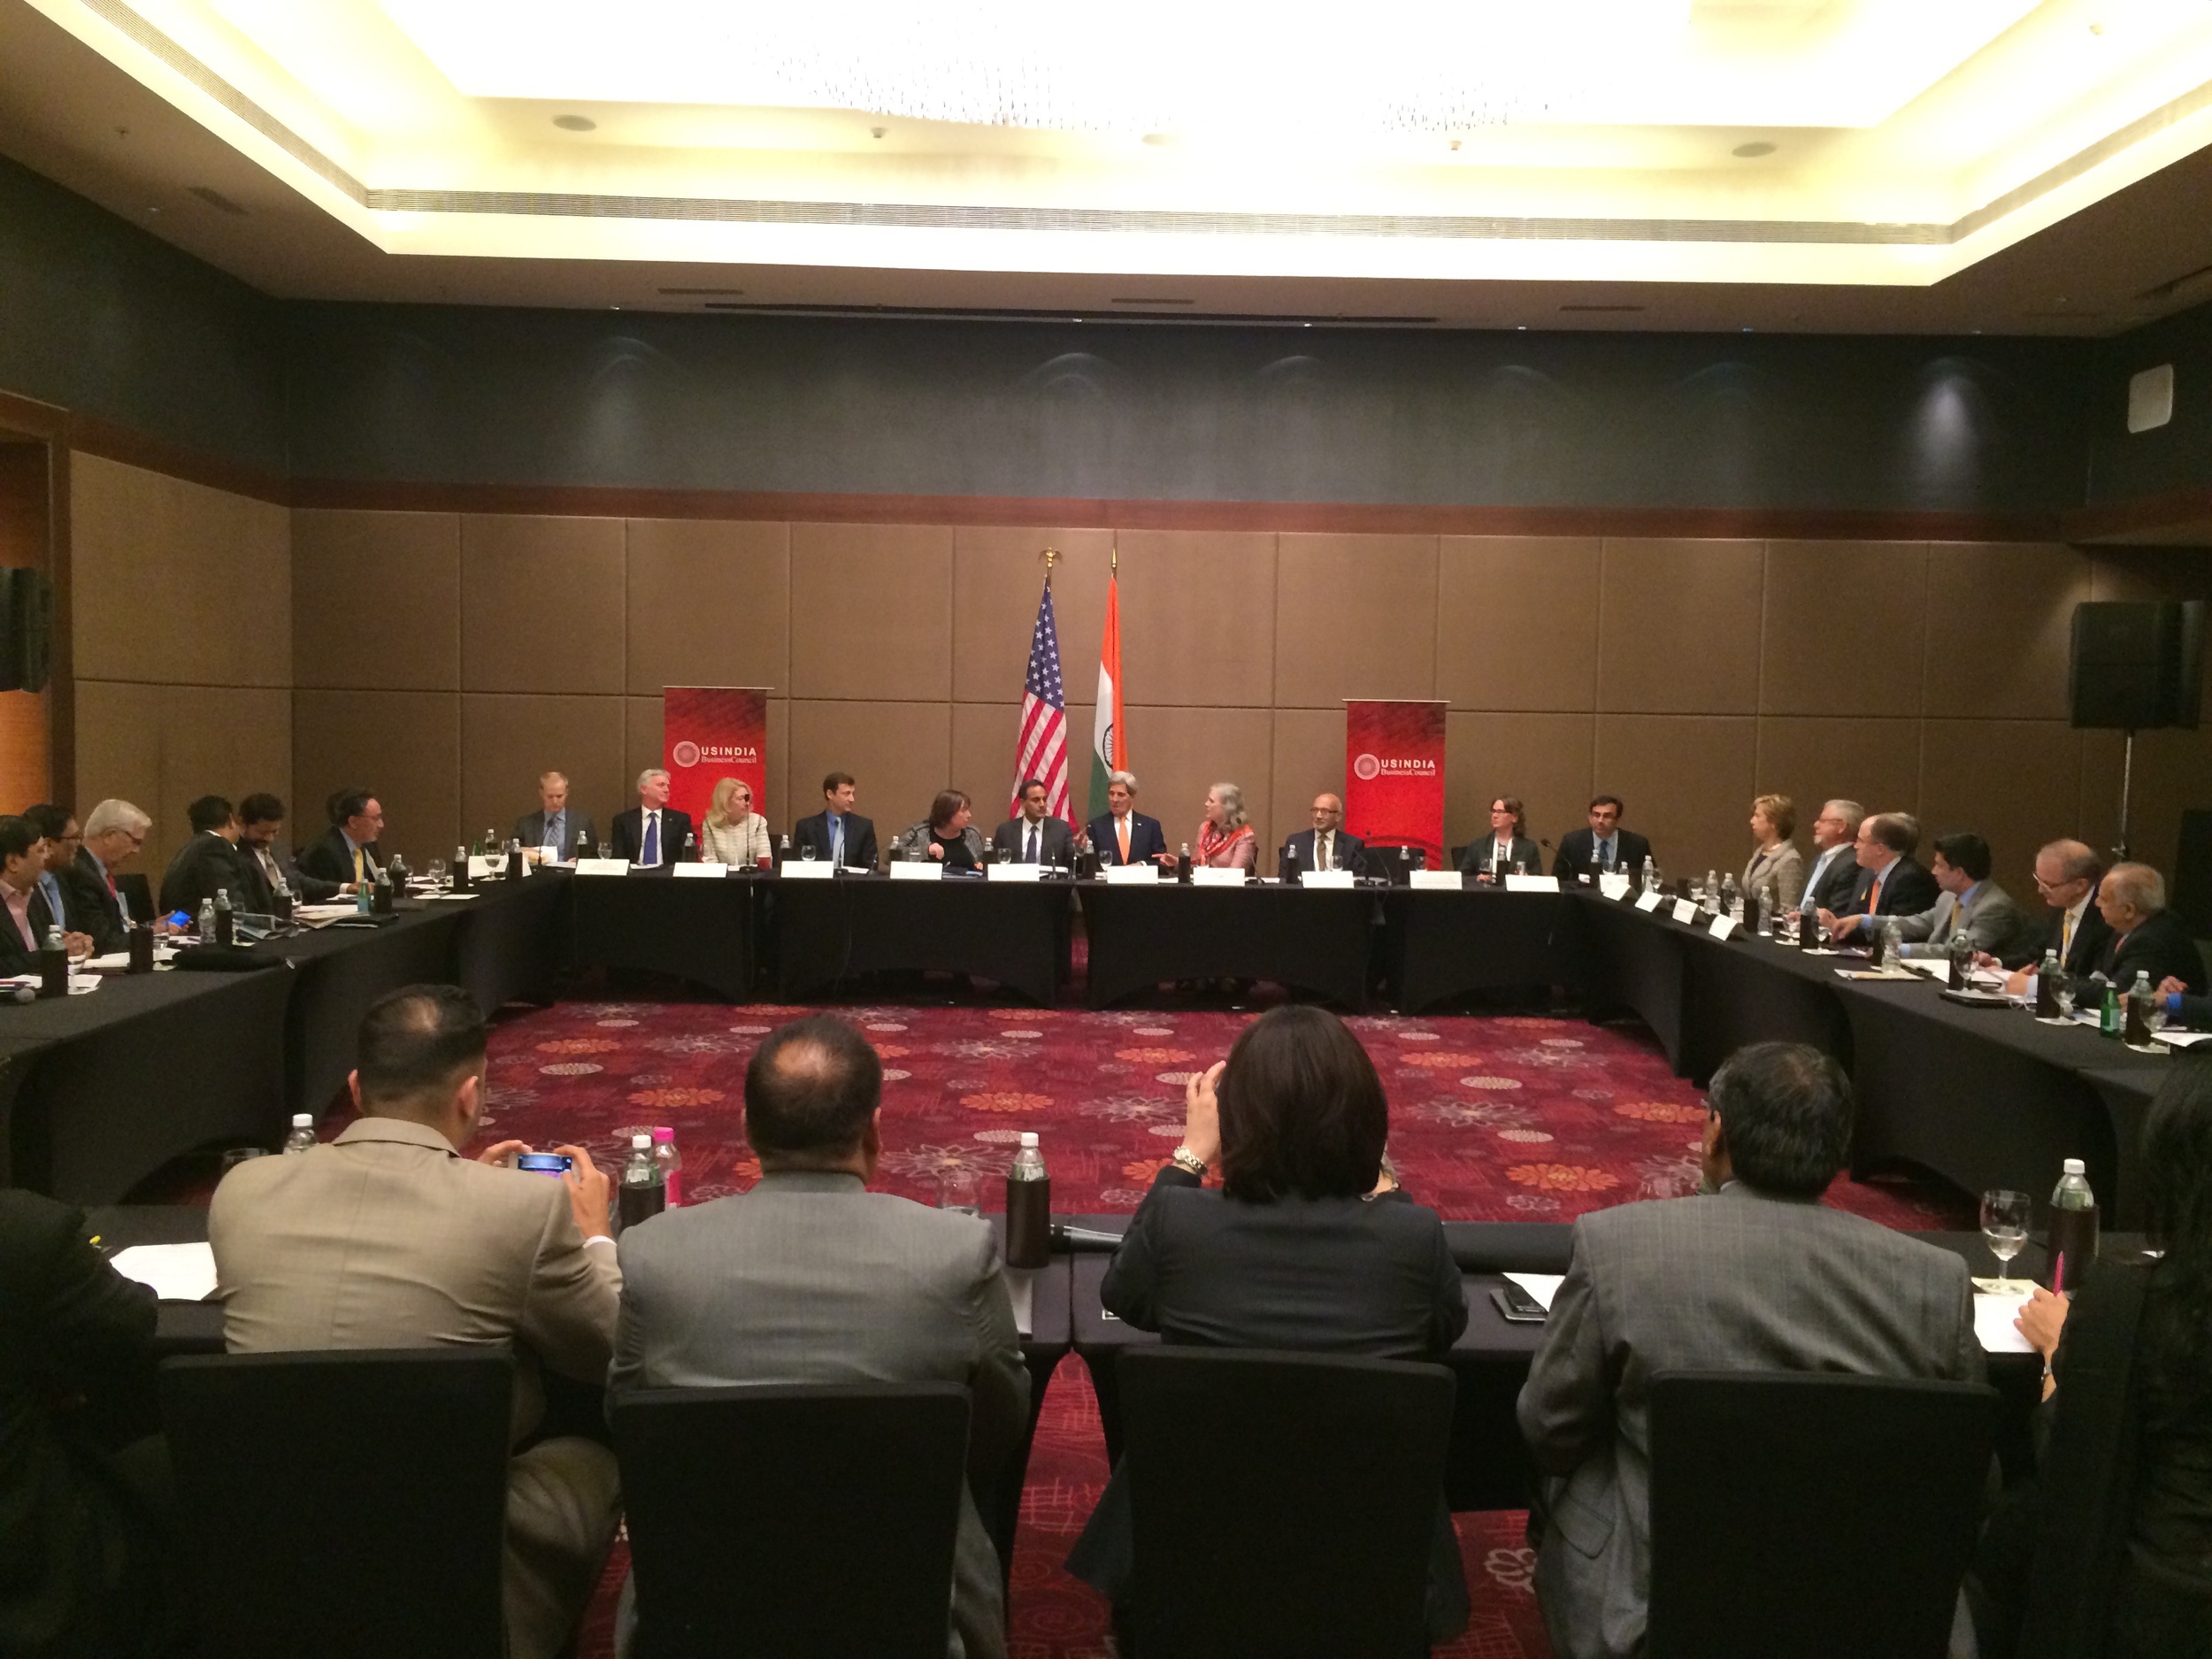   Suresh Nichani, Vice Chairman of RootCorp&nbsp;(extreme left),&nbsp;on the round table with Honorable John Kerry  , United States Secretary of State (center), in Ahmedabad, India on US-India Business and Economic Policies.  